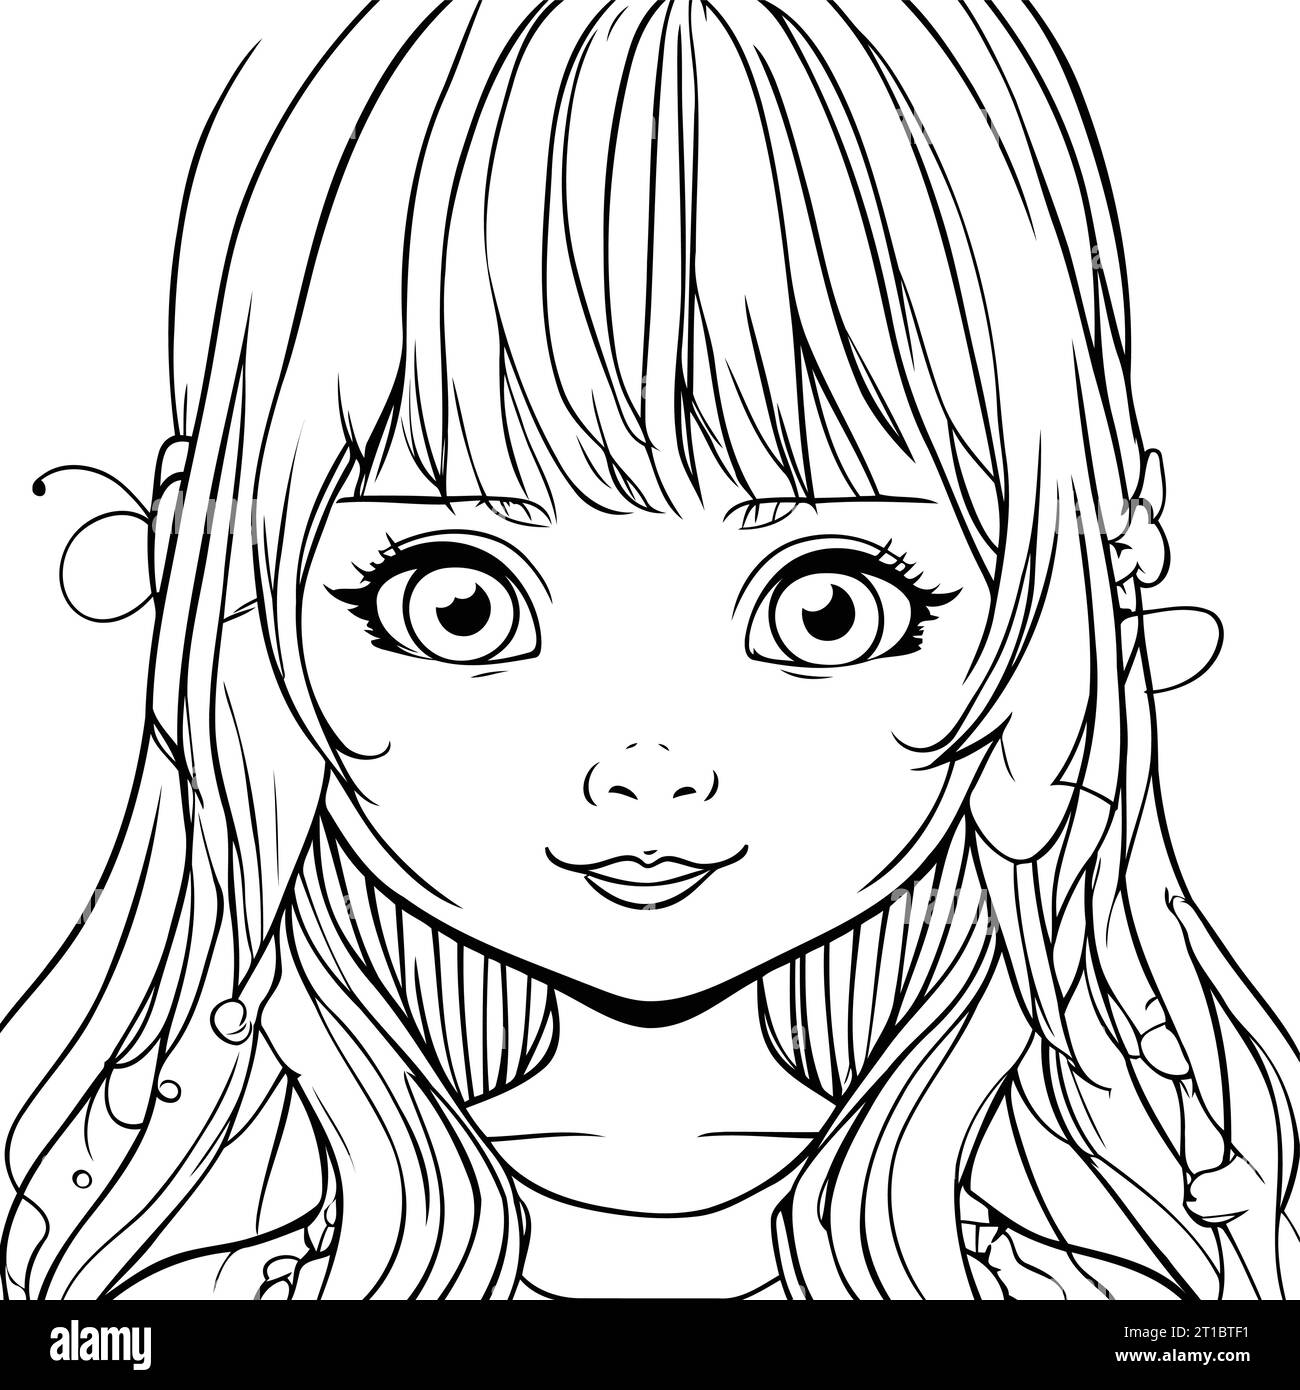 Cute cartoon girl with long hair. vector illustration for coloring book ...